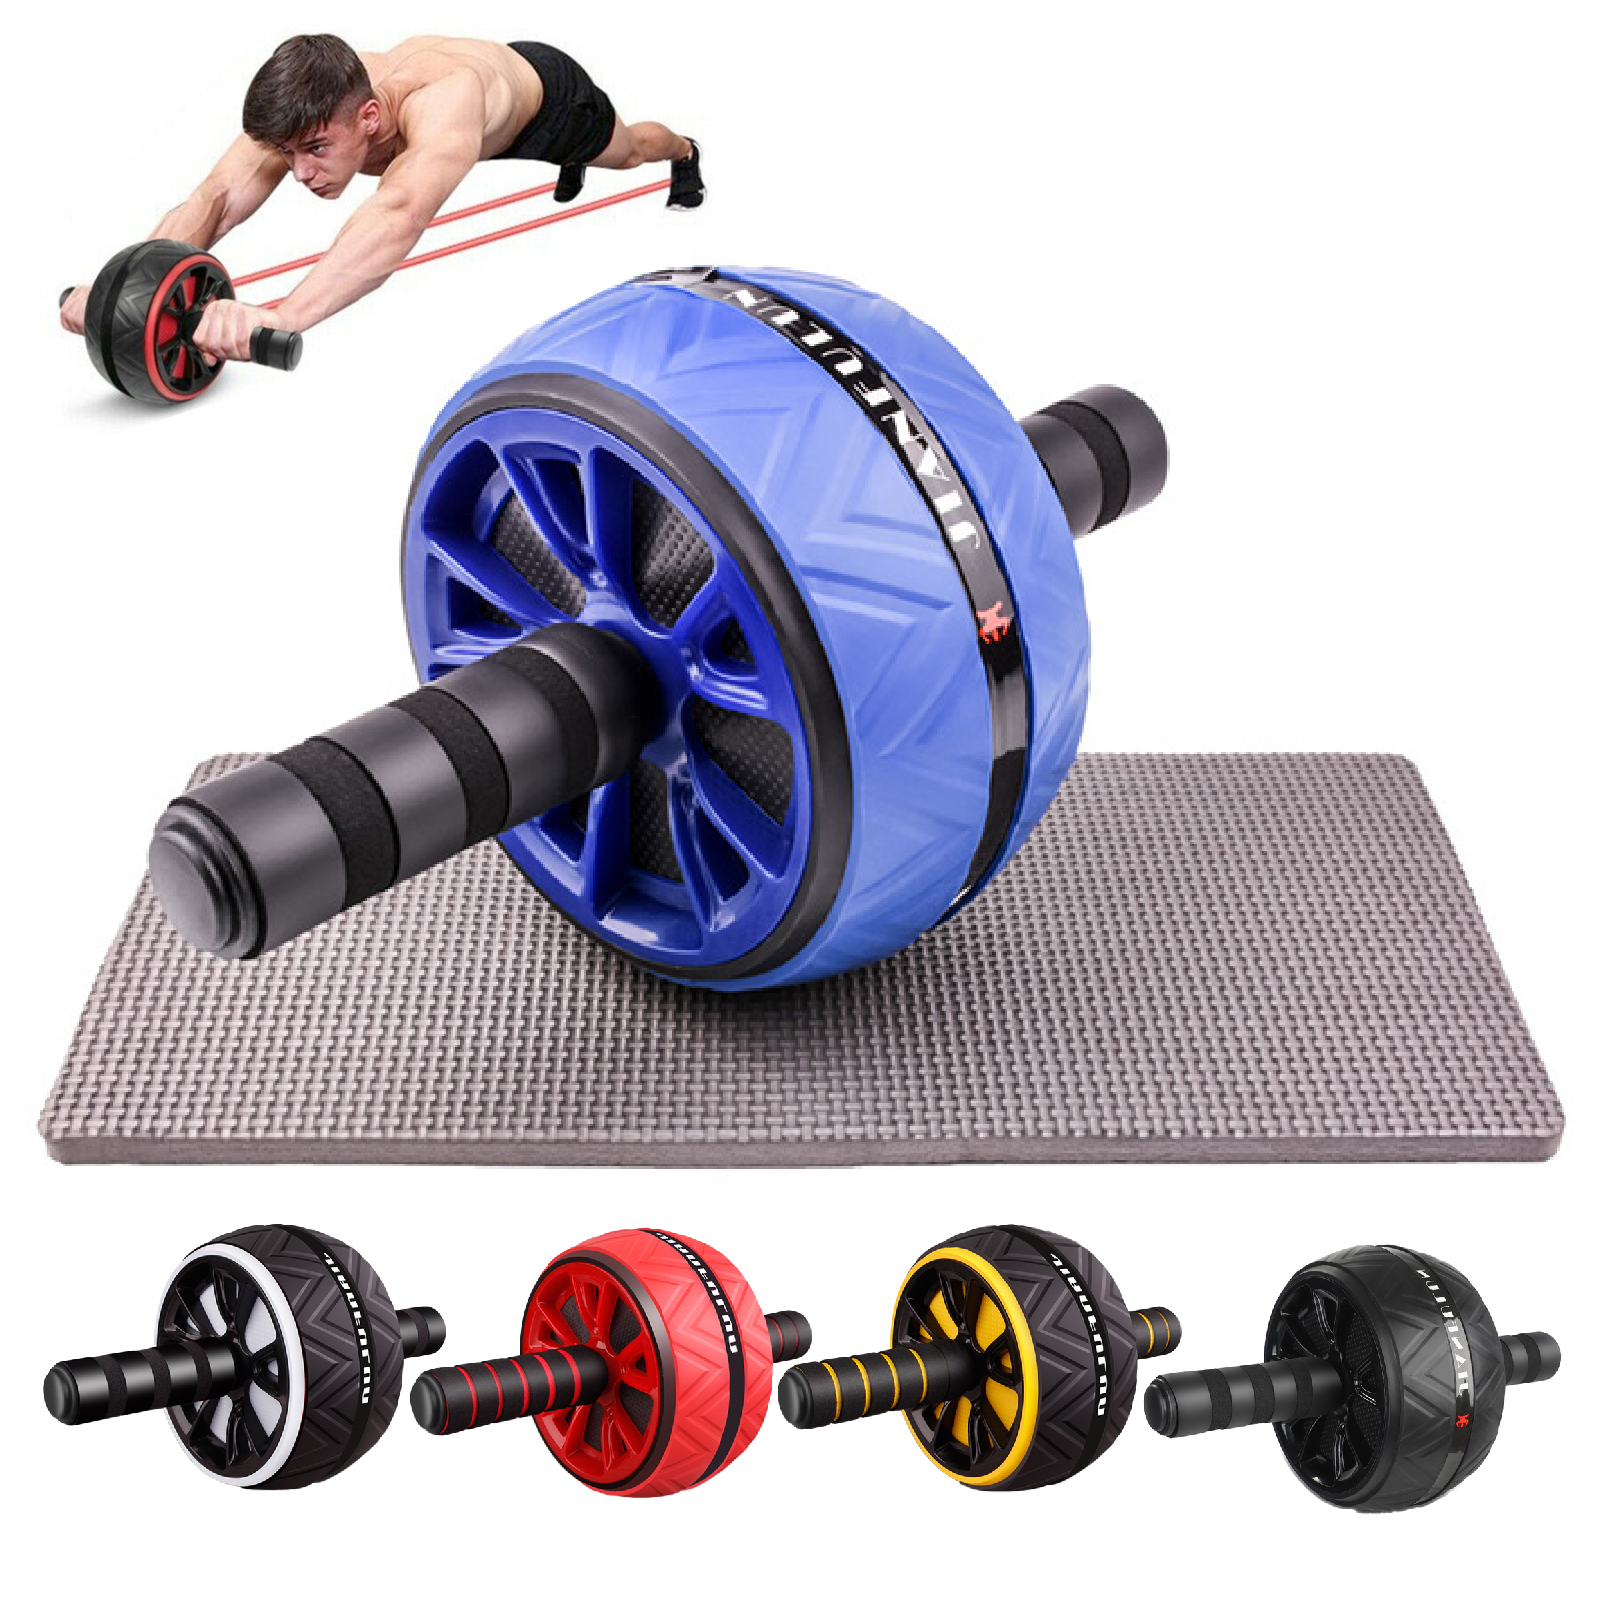 T-link Ab Roller For Abs Workout, Ab Roller Wheel Exercise Equipment For  Core Workout, Ab Wheel Roller For Home Gym, Ab Workout Equipment For, Is  Ab Roller Effective